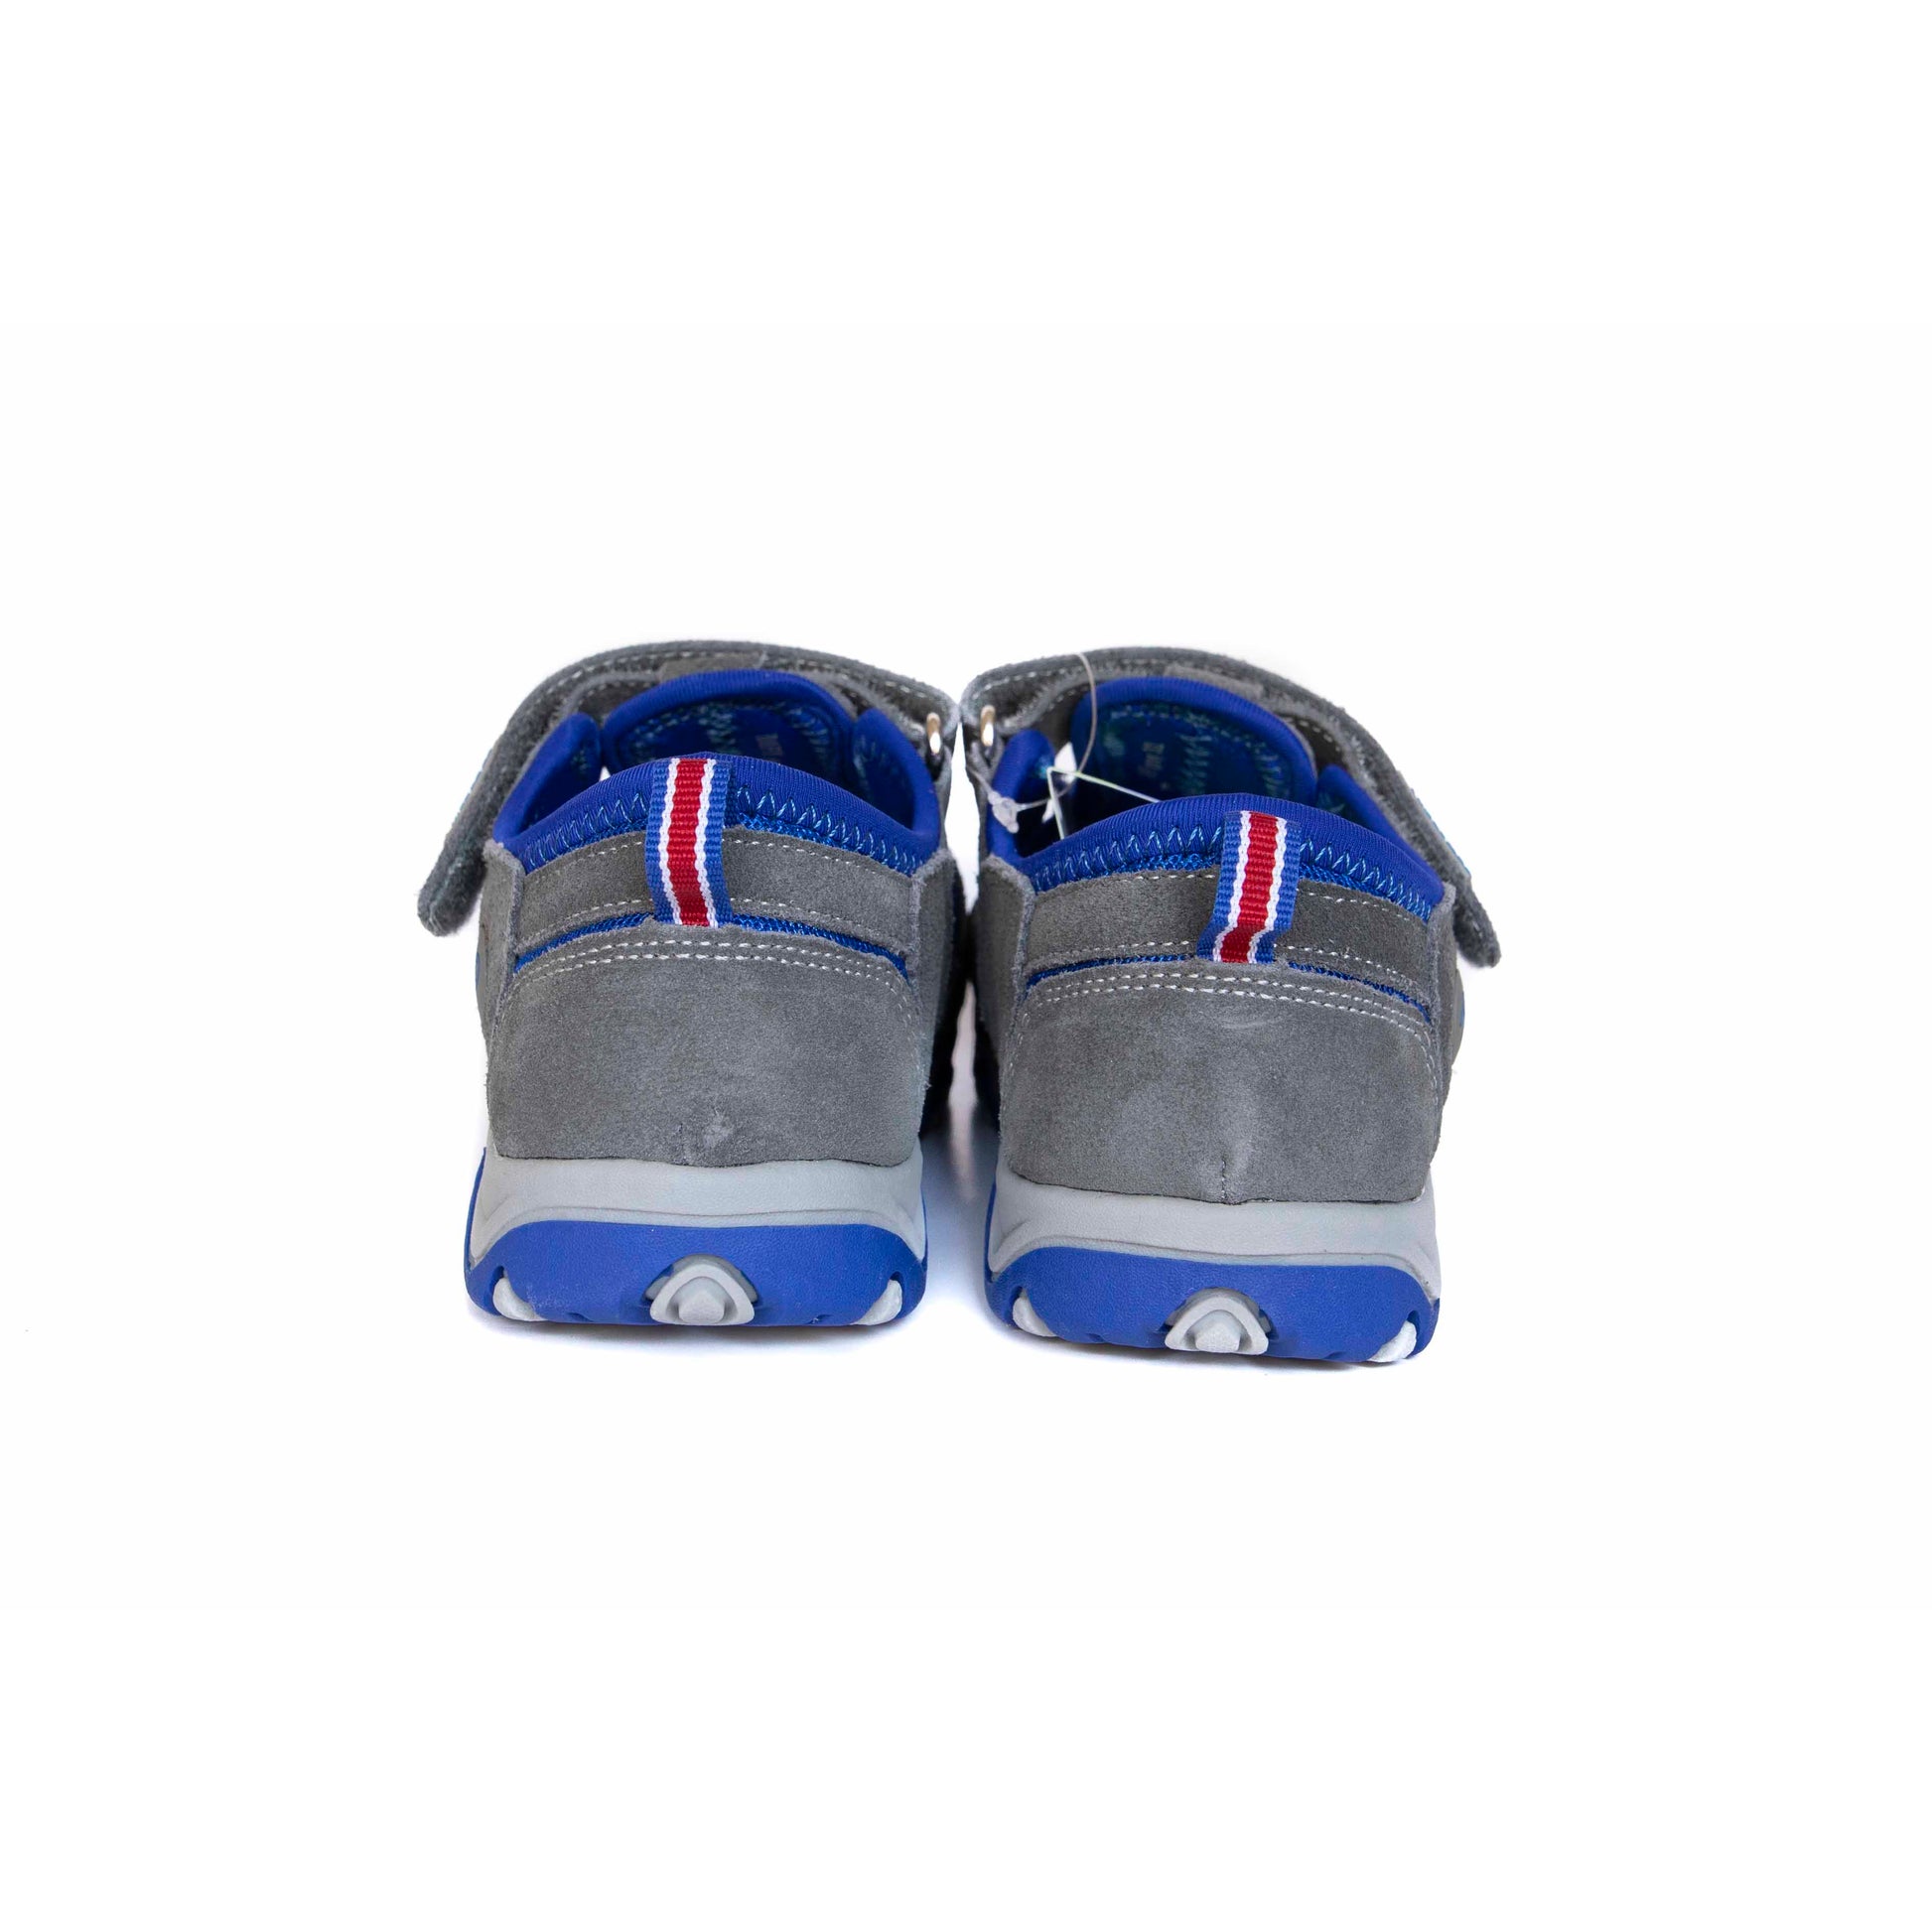 DAFY grey older boys arch support sandals - feelgoodshoes.ae